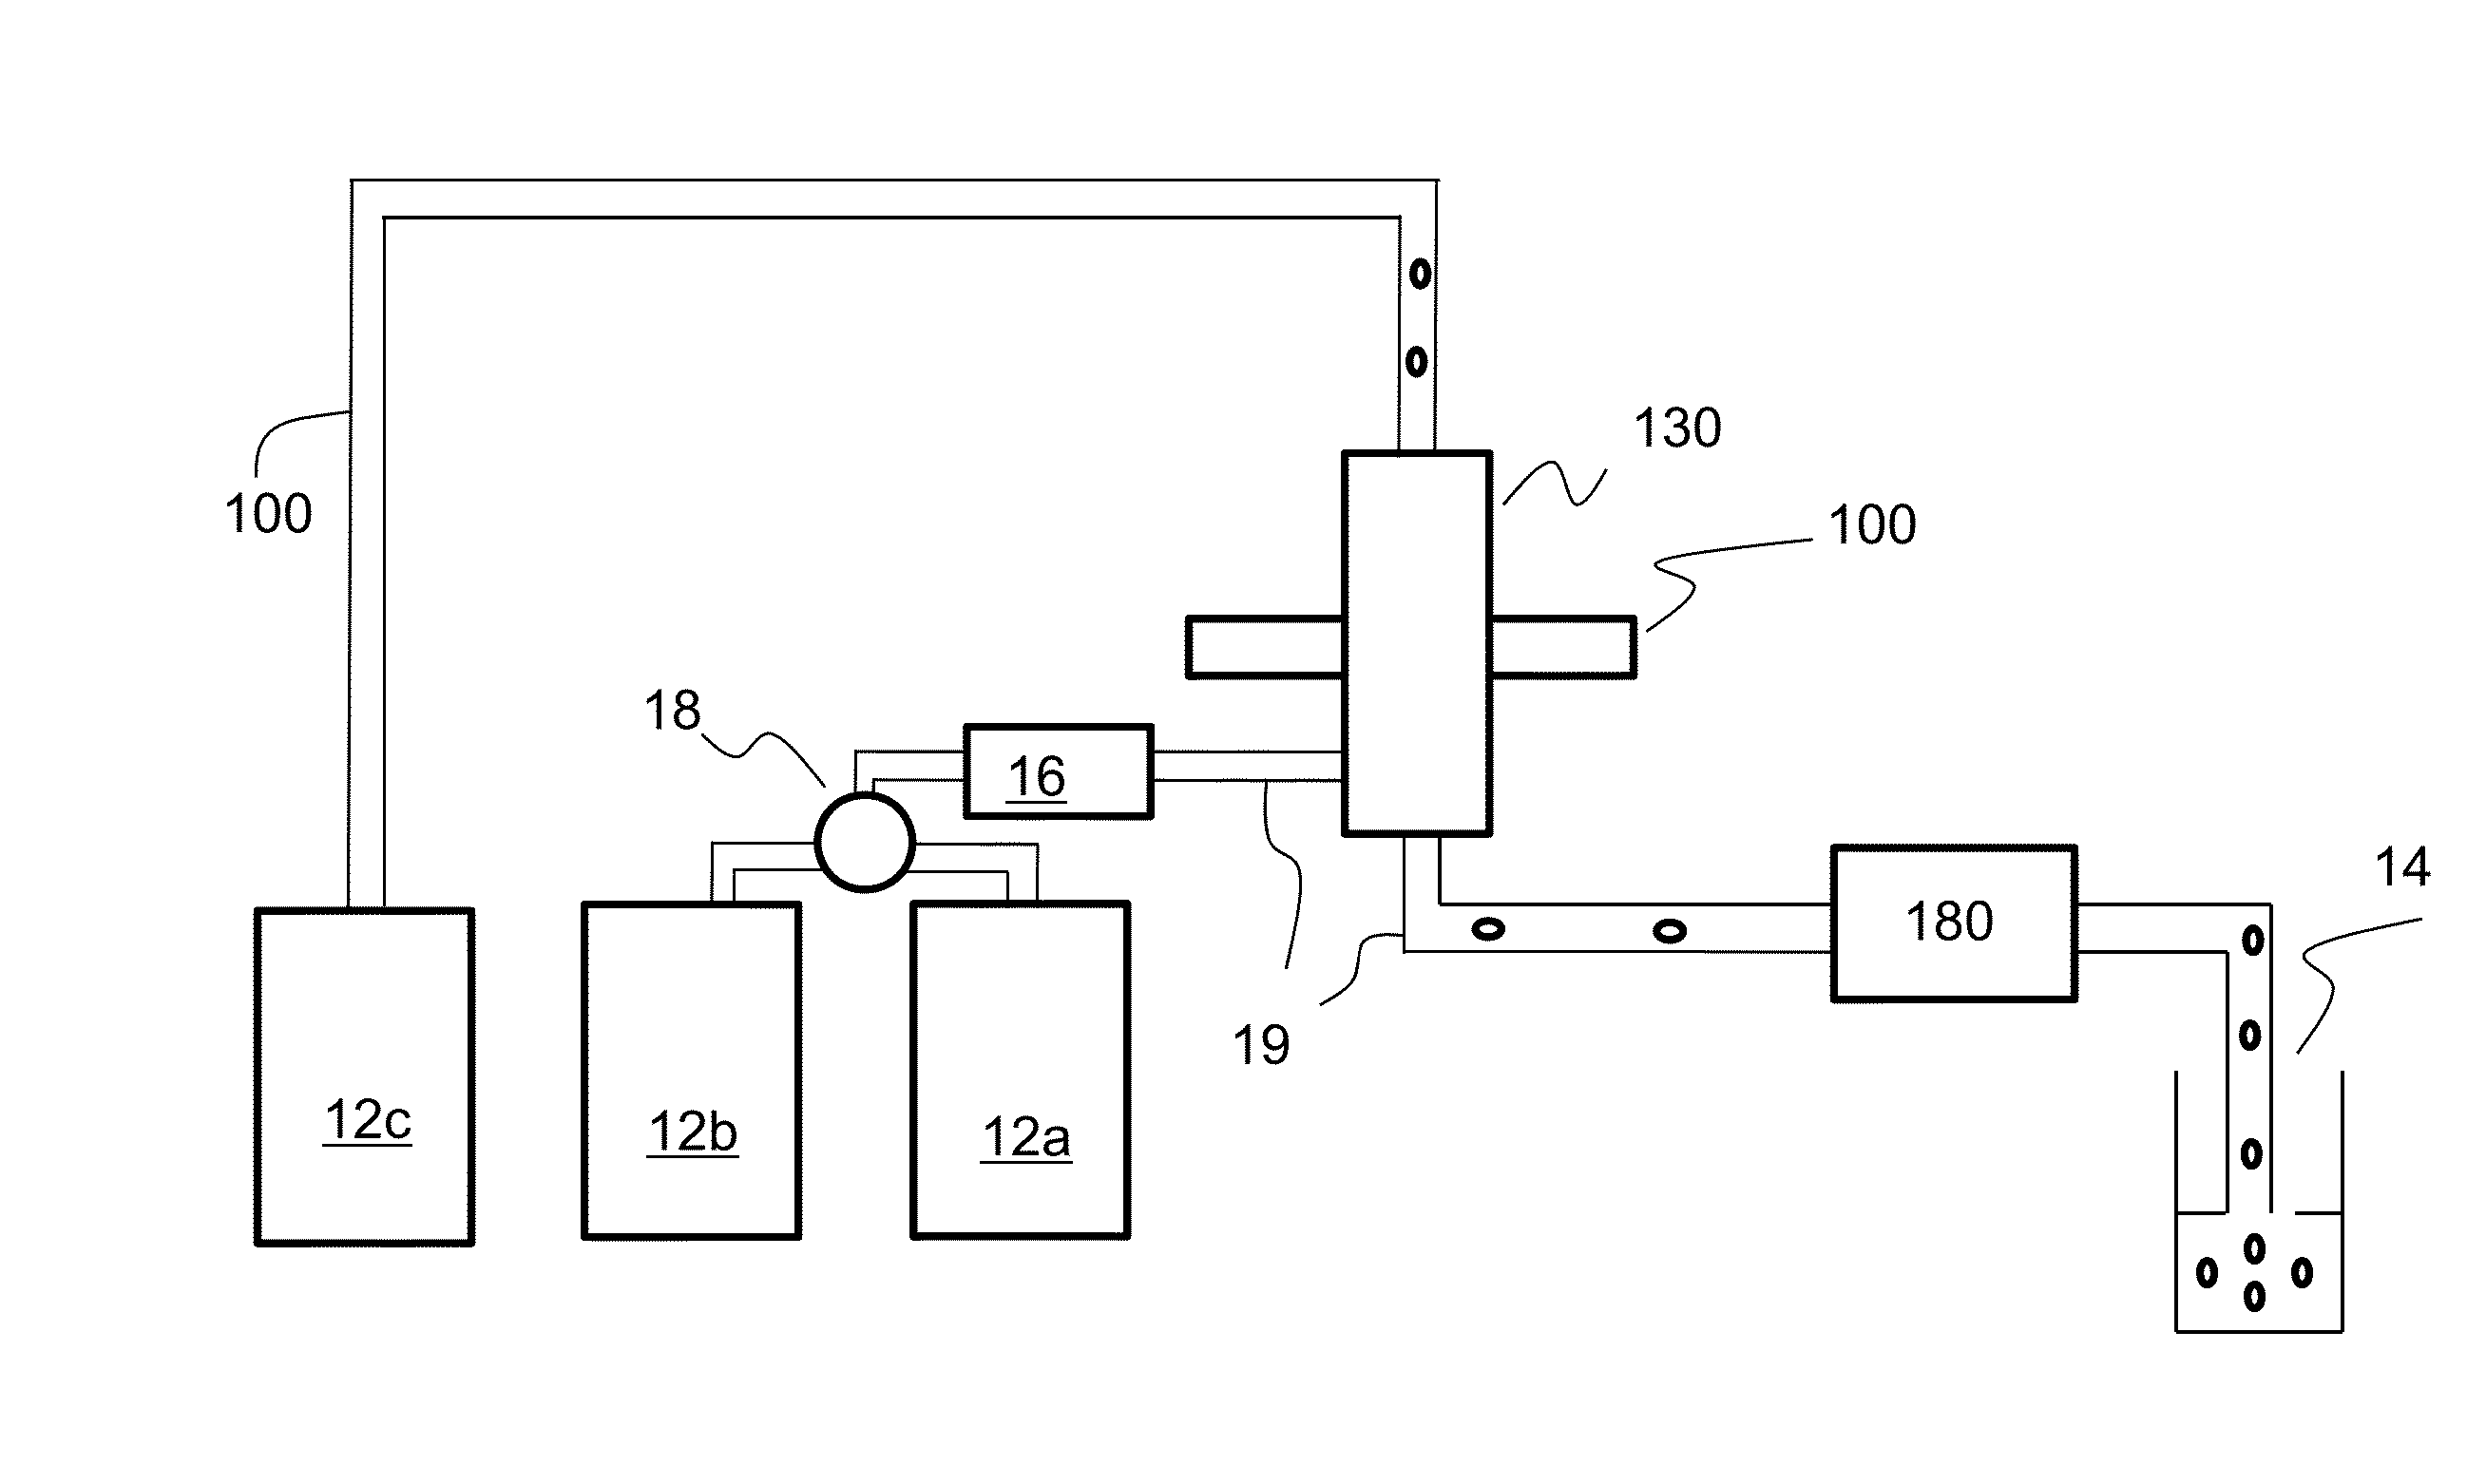 Optical engine for flow cytometer, flow cytometer system and methods of use